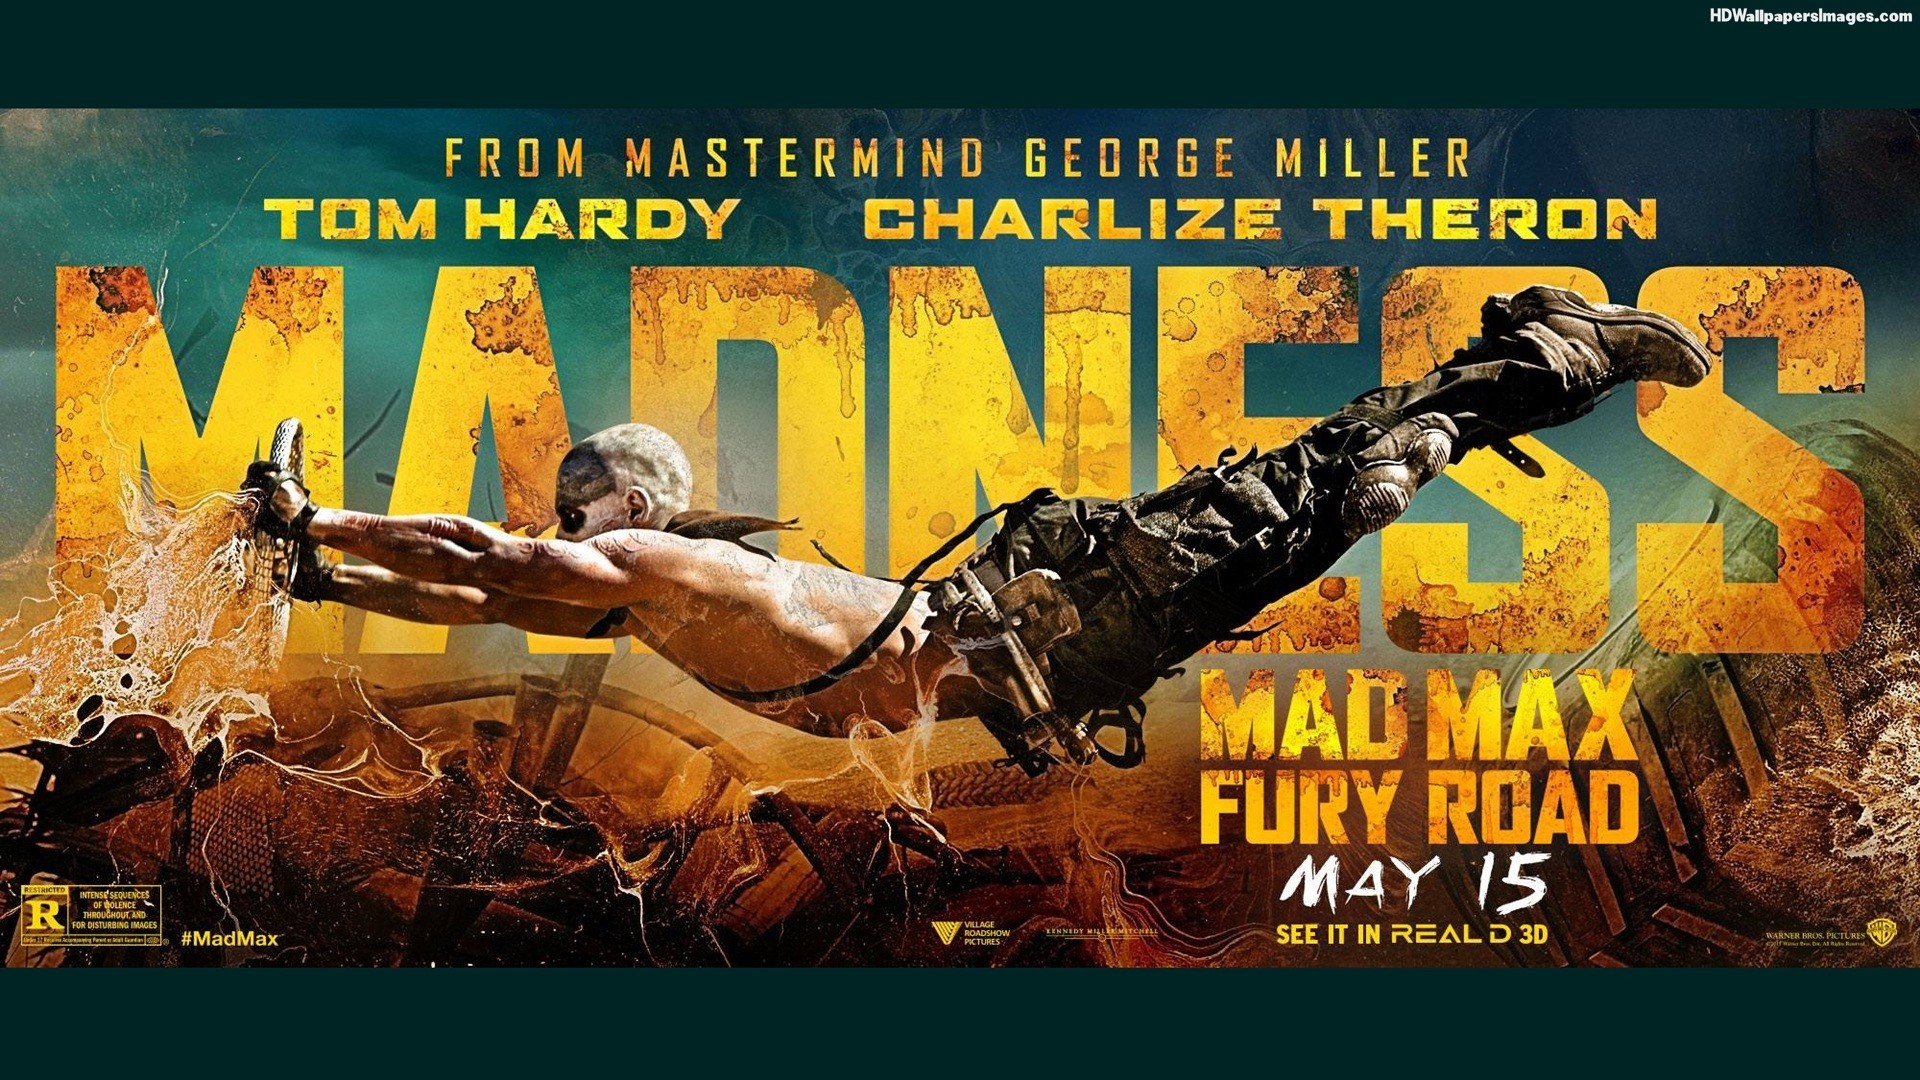 where can i watch mad max fury road free online